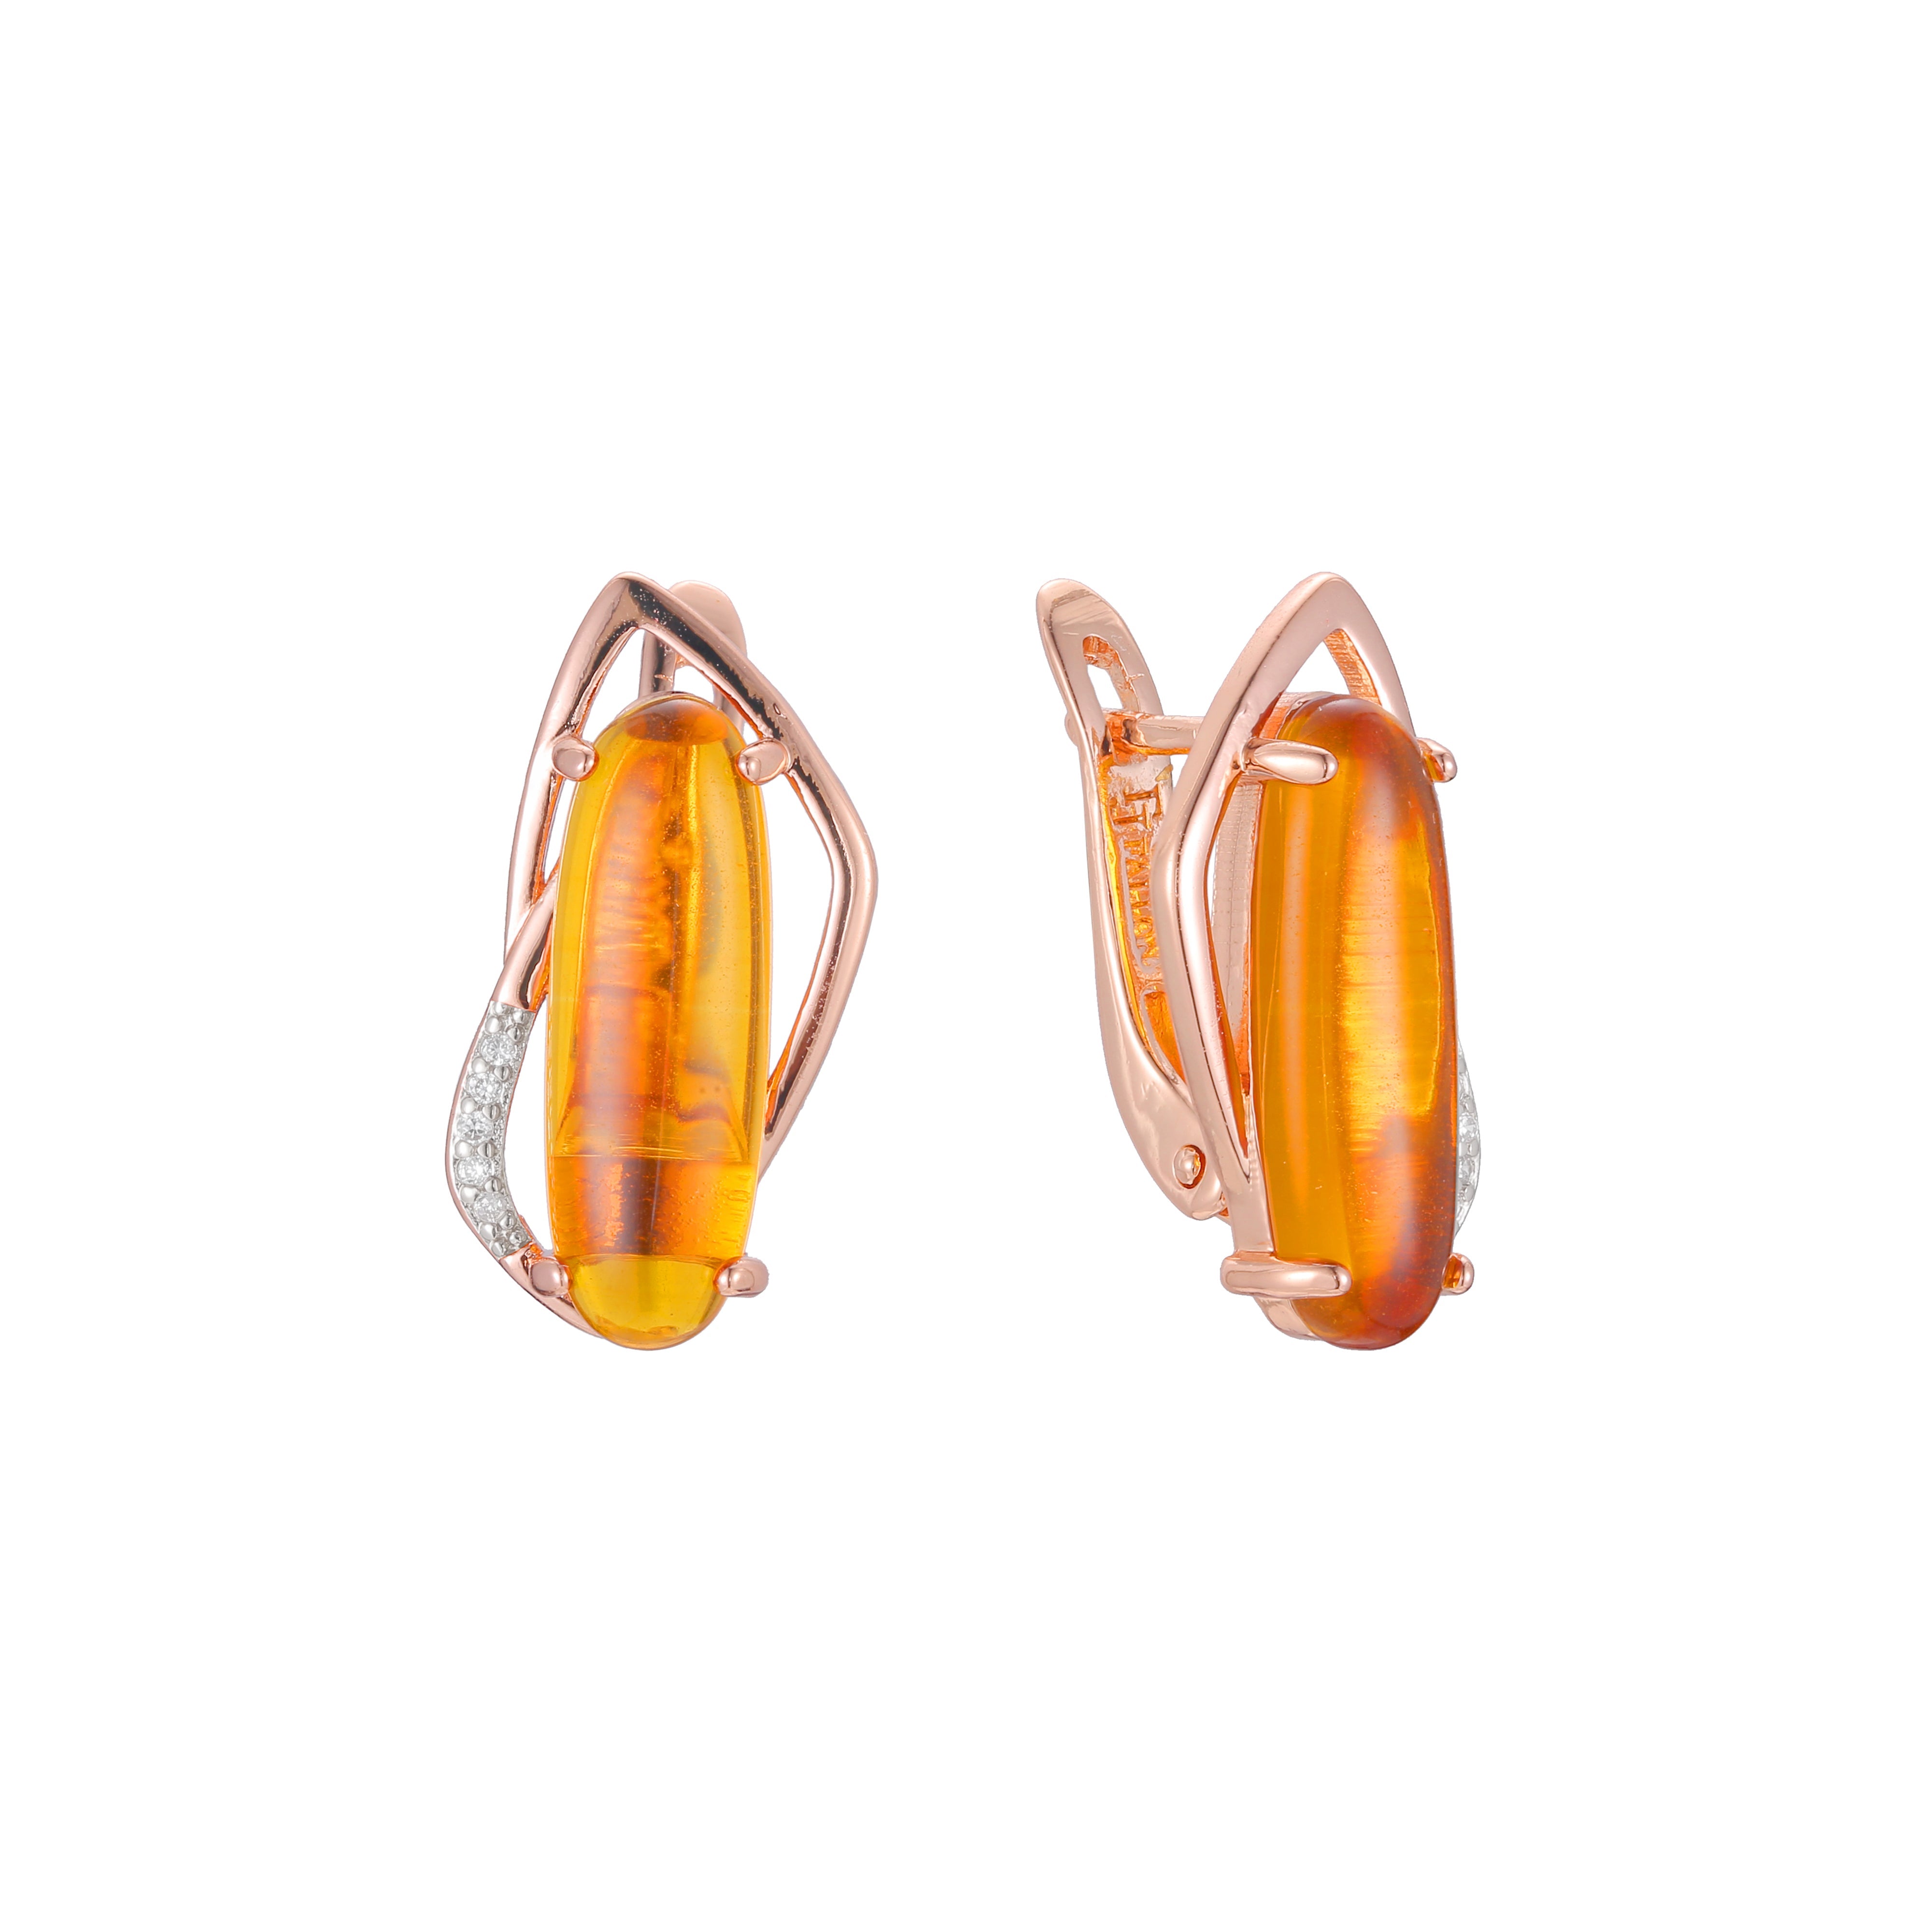 Solitaire big orange stone earrings in 14K Gold, Rose Gold, two tone plating colors